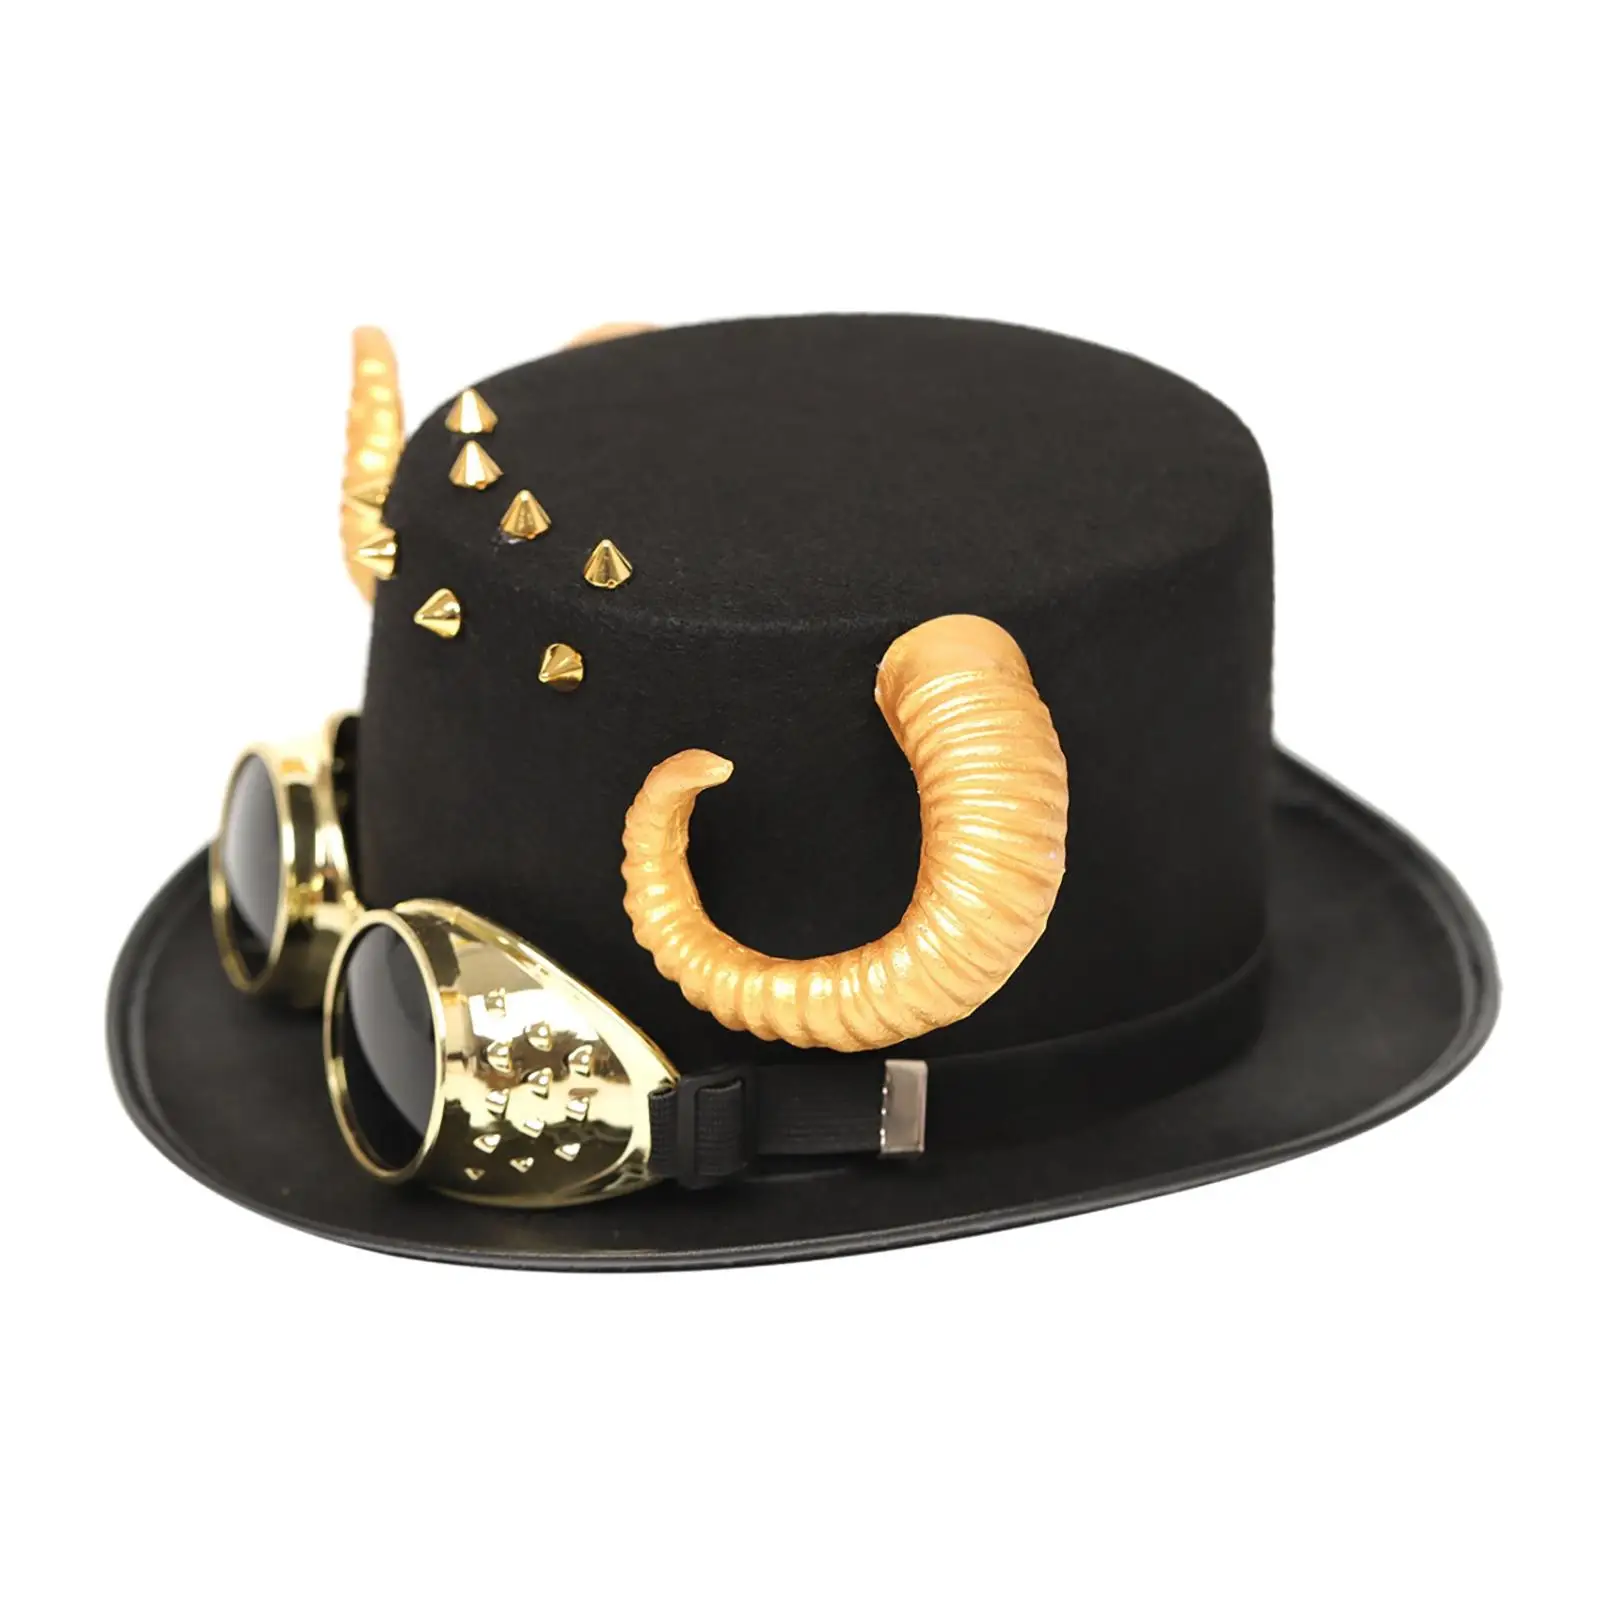 Mens Steampunk Gear Top Hat removable goggles Halloween costume accessory Gold 